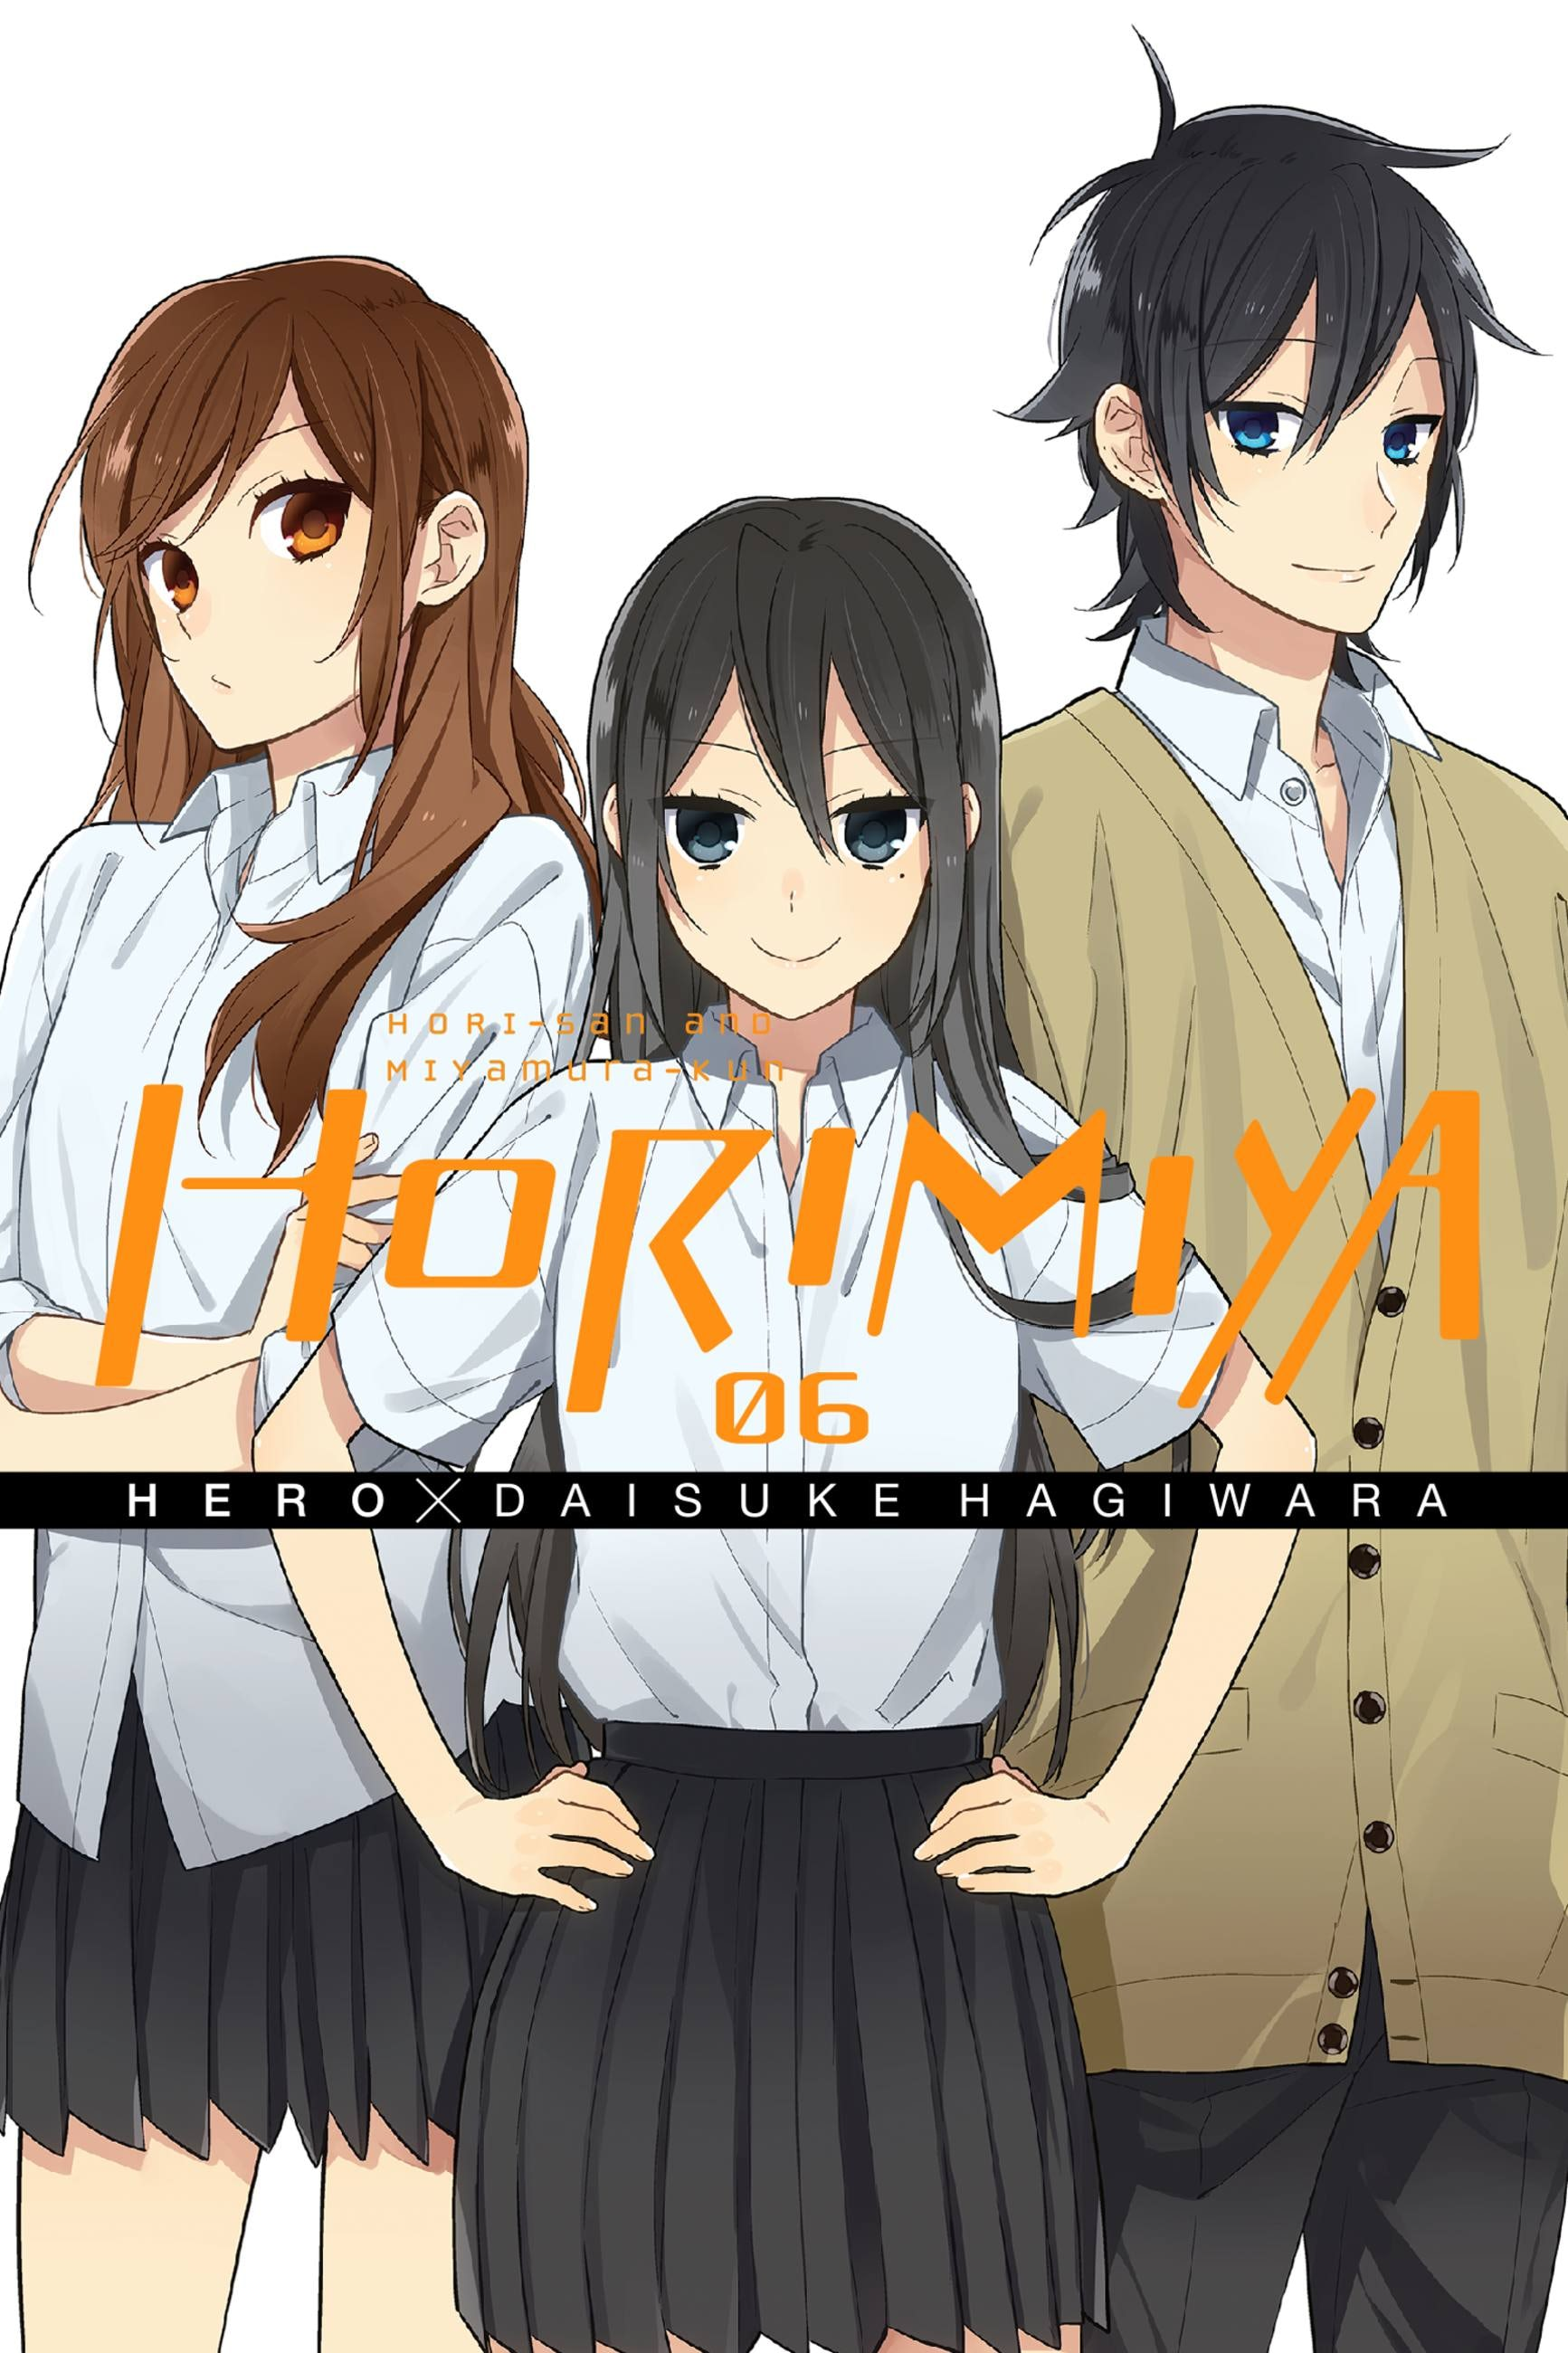 Horimiya; Filling In The Missing Content - Geek News NOW